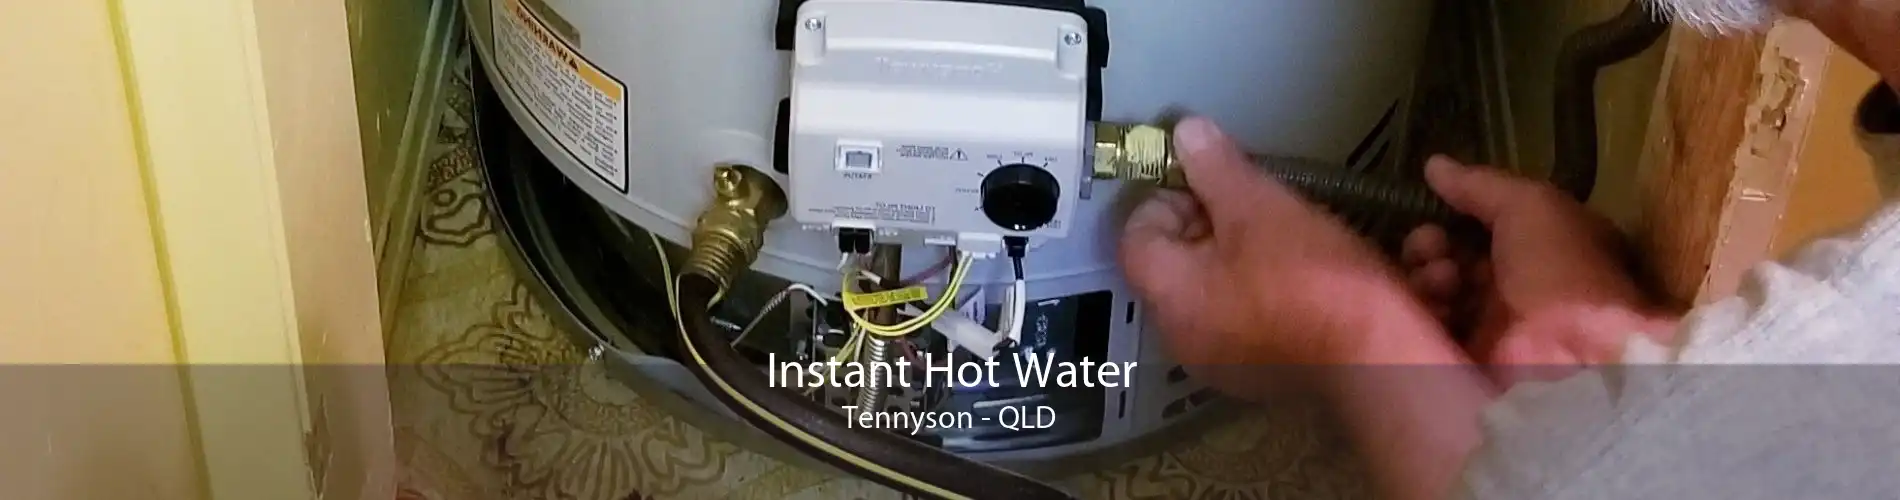 Instant Hot Water Tennyson - QLD